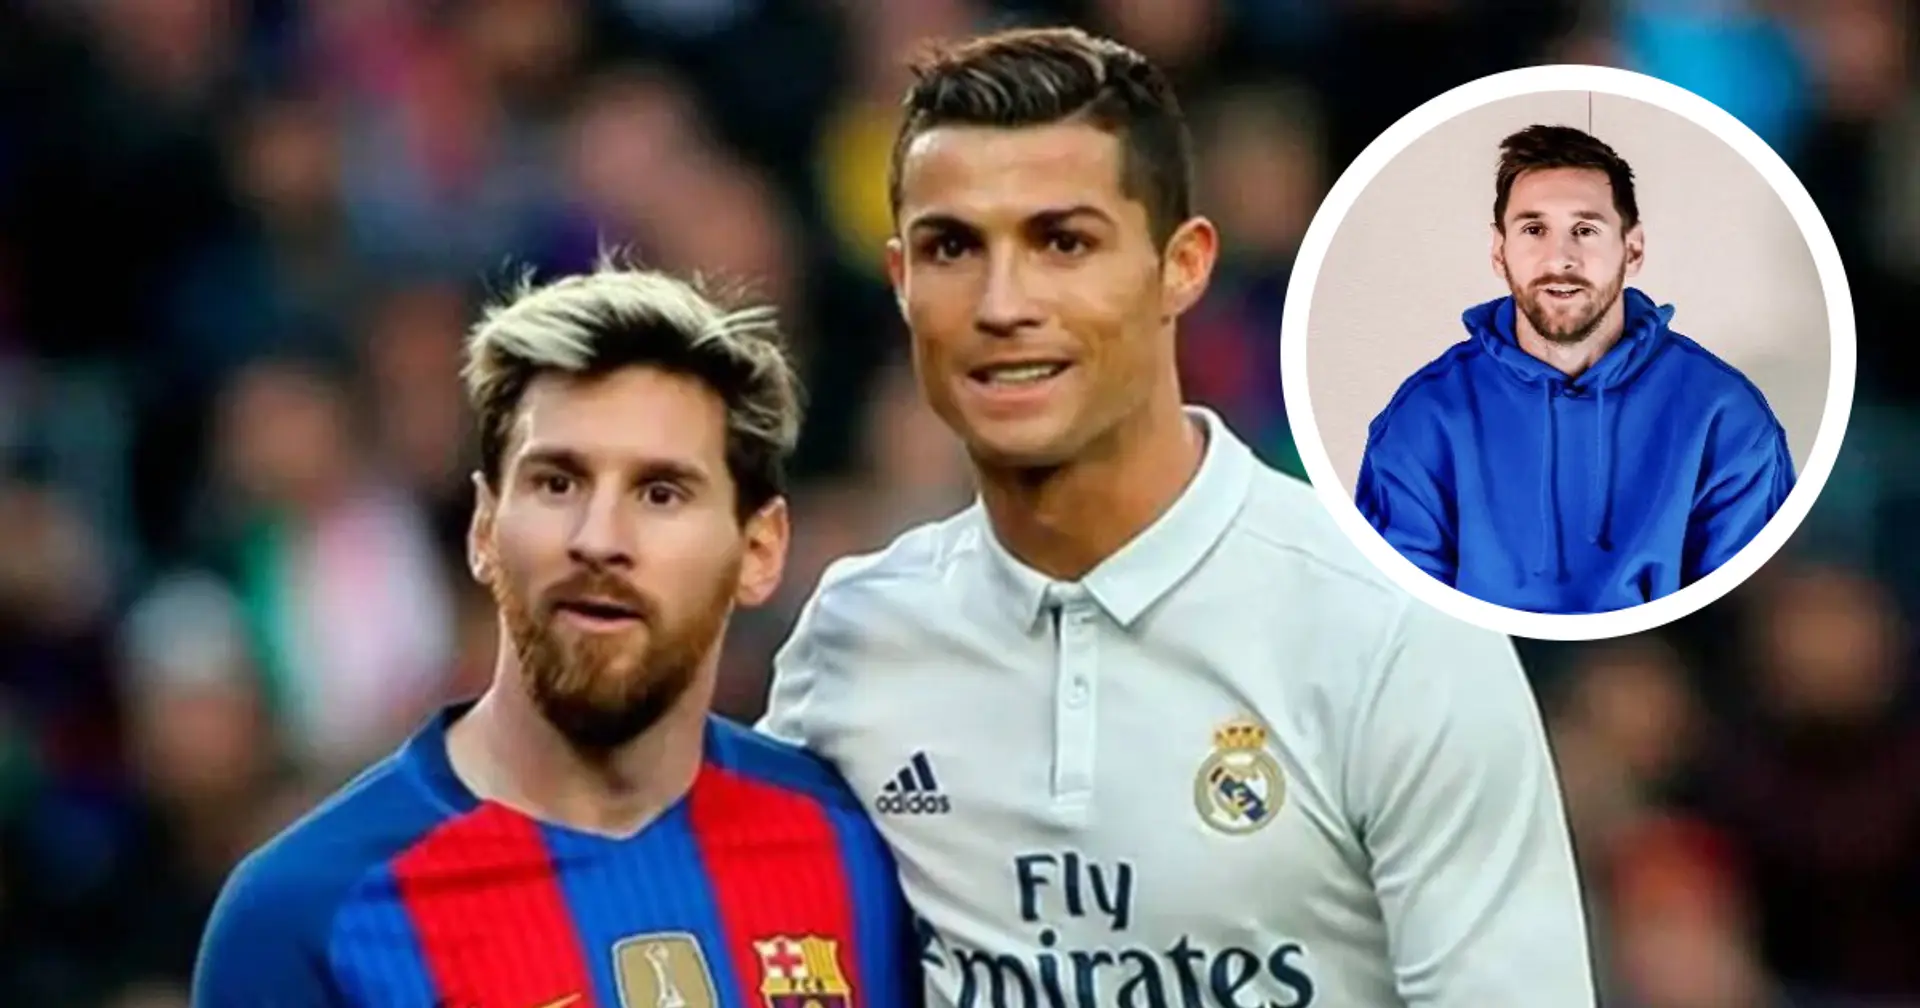 'We were competing for years': Lionel Messi opens up on Cristiano Ronaldo rivalry after 7th Ballon d'Or win